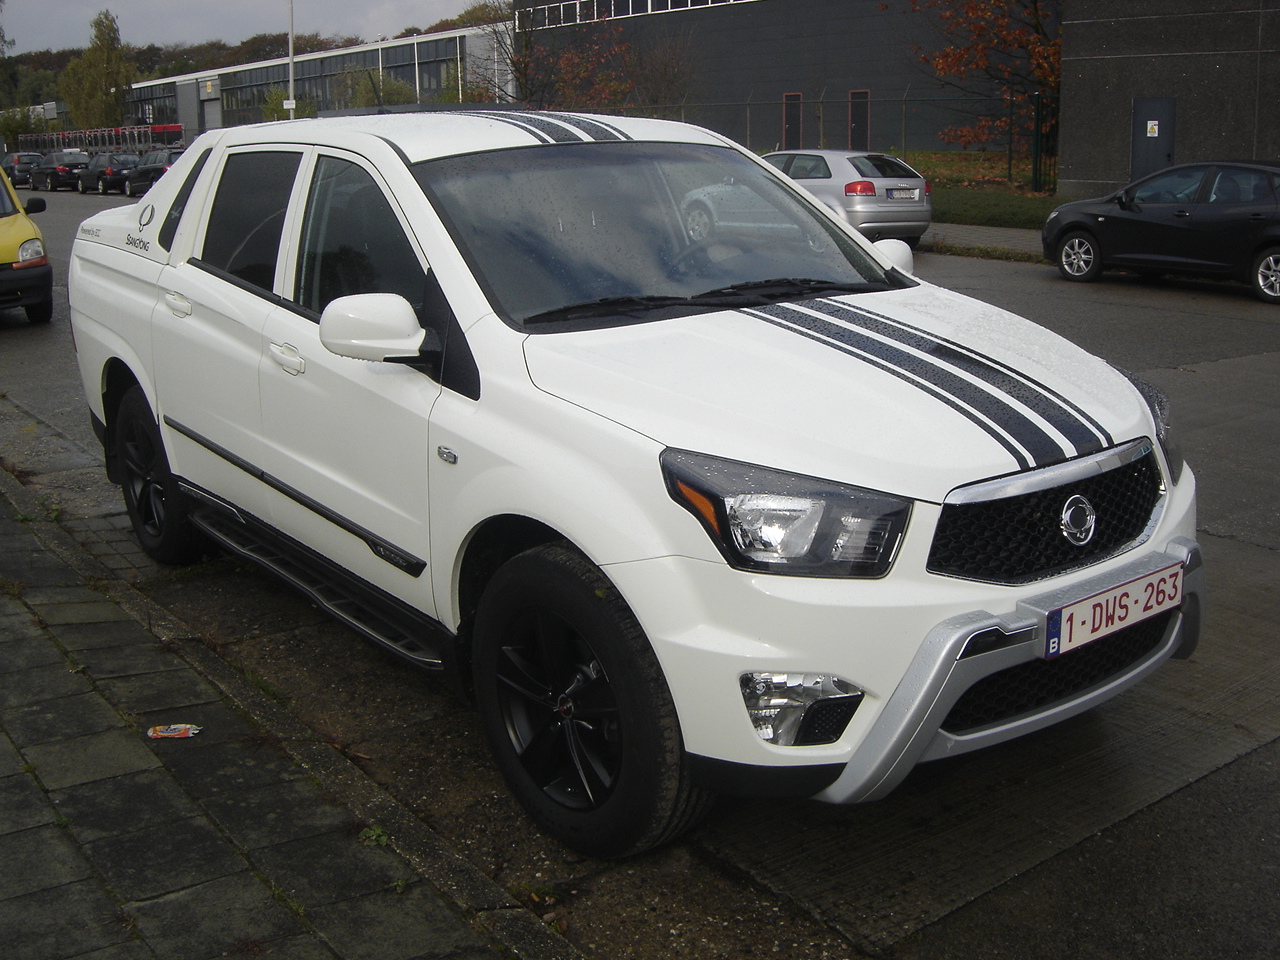 Antwerpen: SsangYong Actyon Sports | Flickr - Photo Sharing!